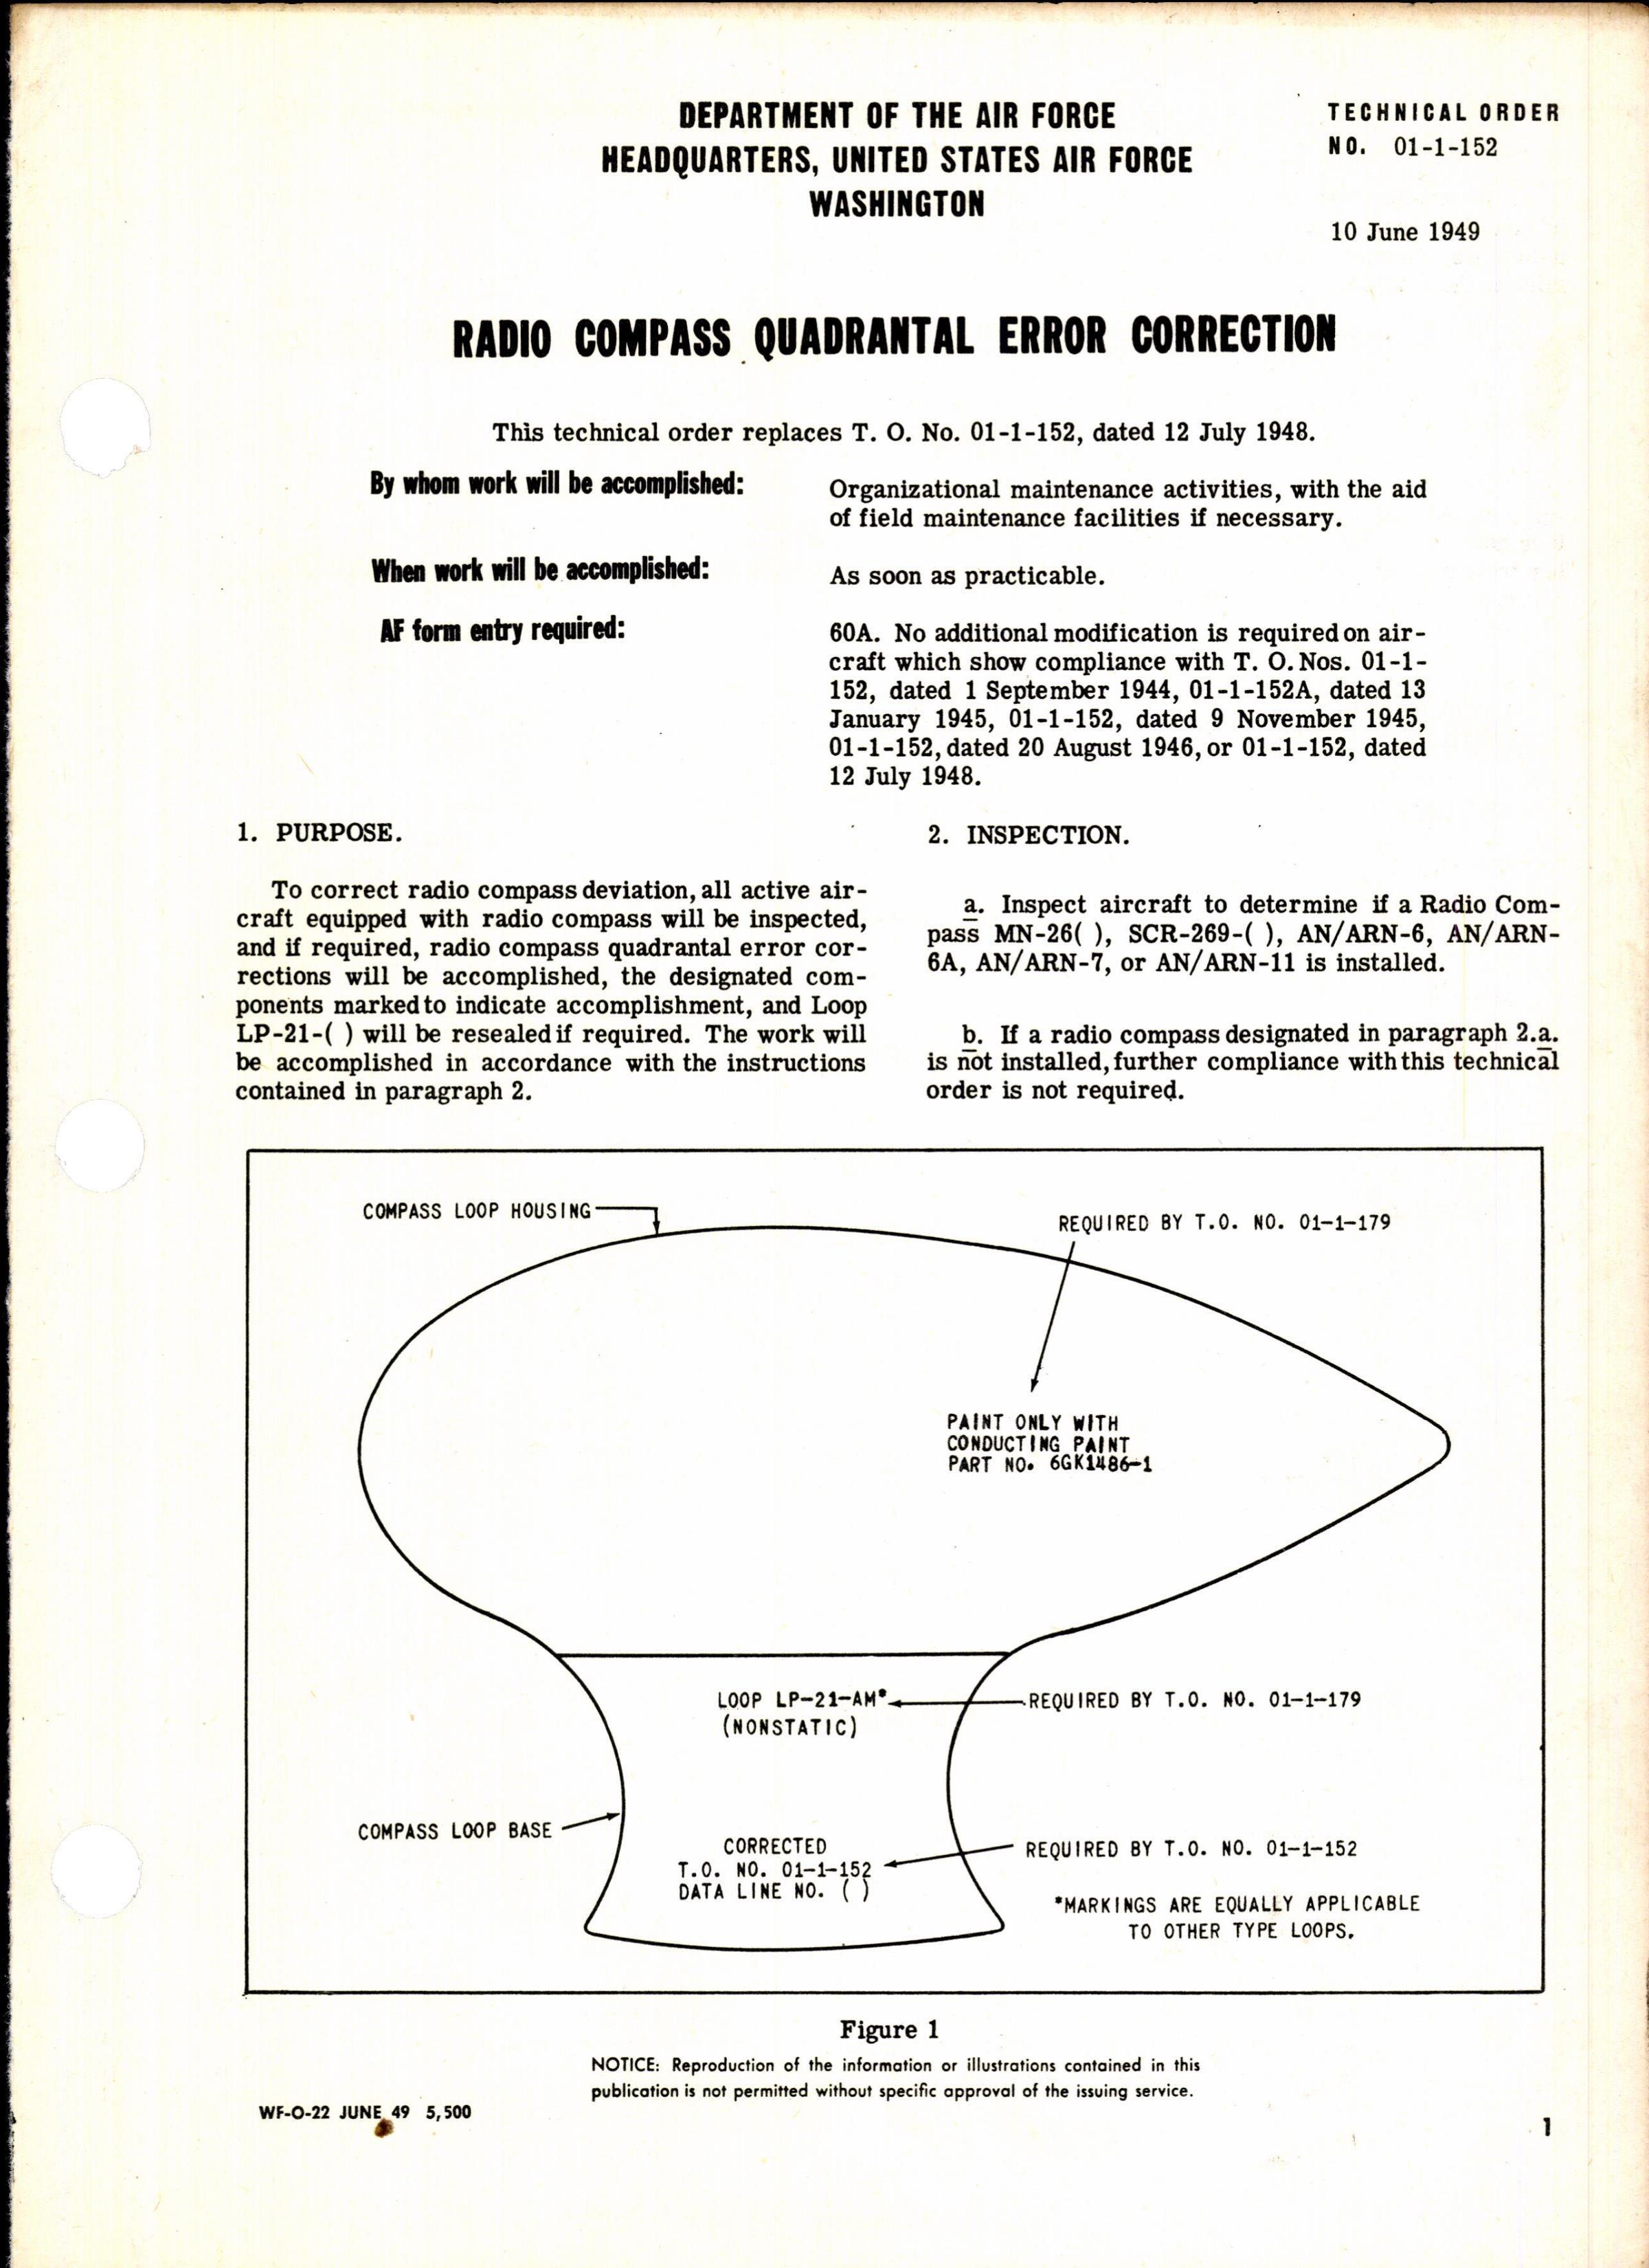 Sample page 1 from AirCorps Library document: Radio Compass Quadrantal Error Correction